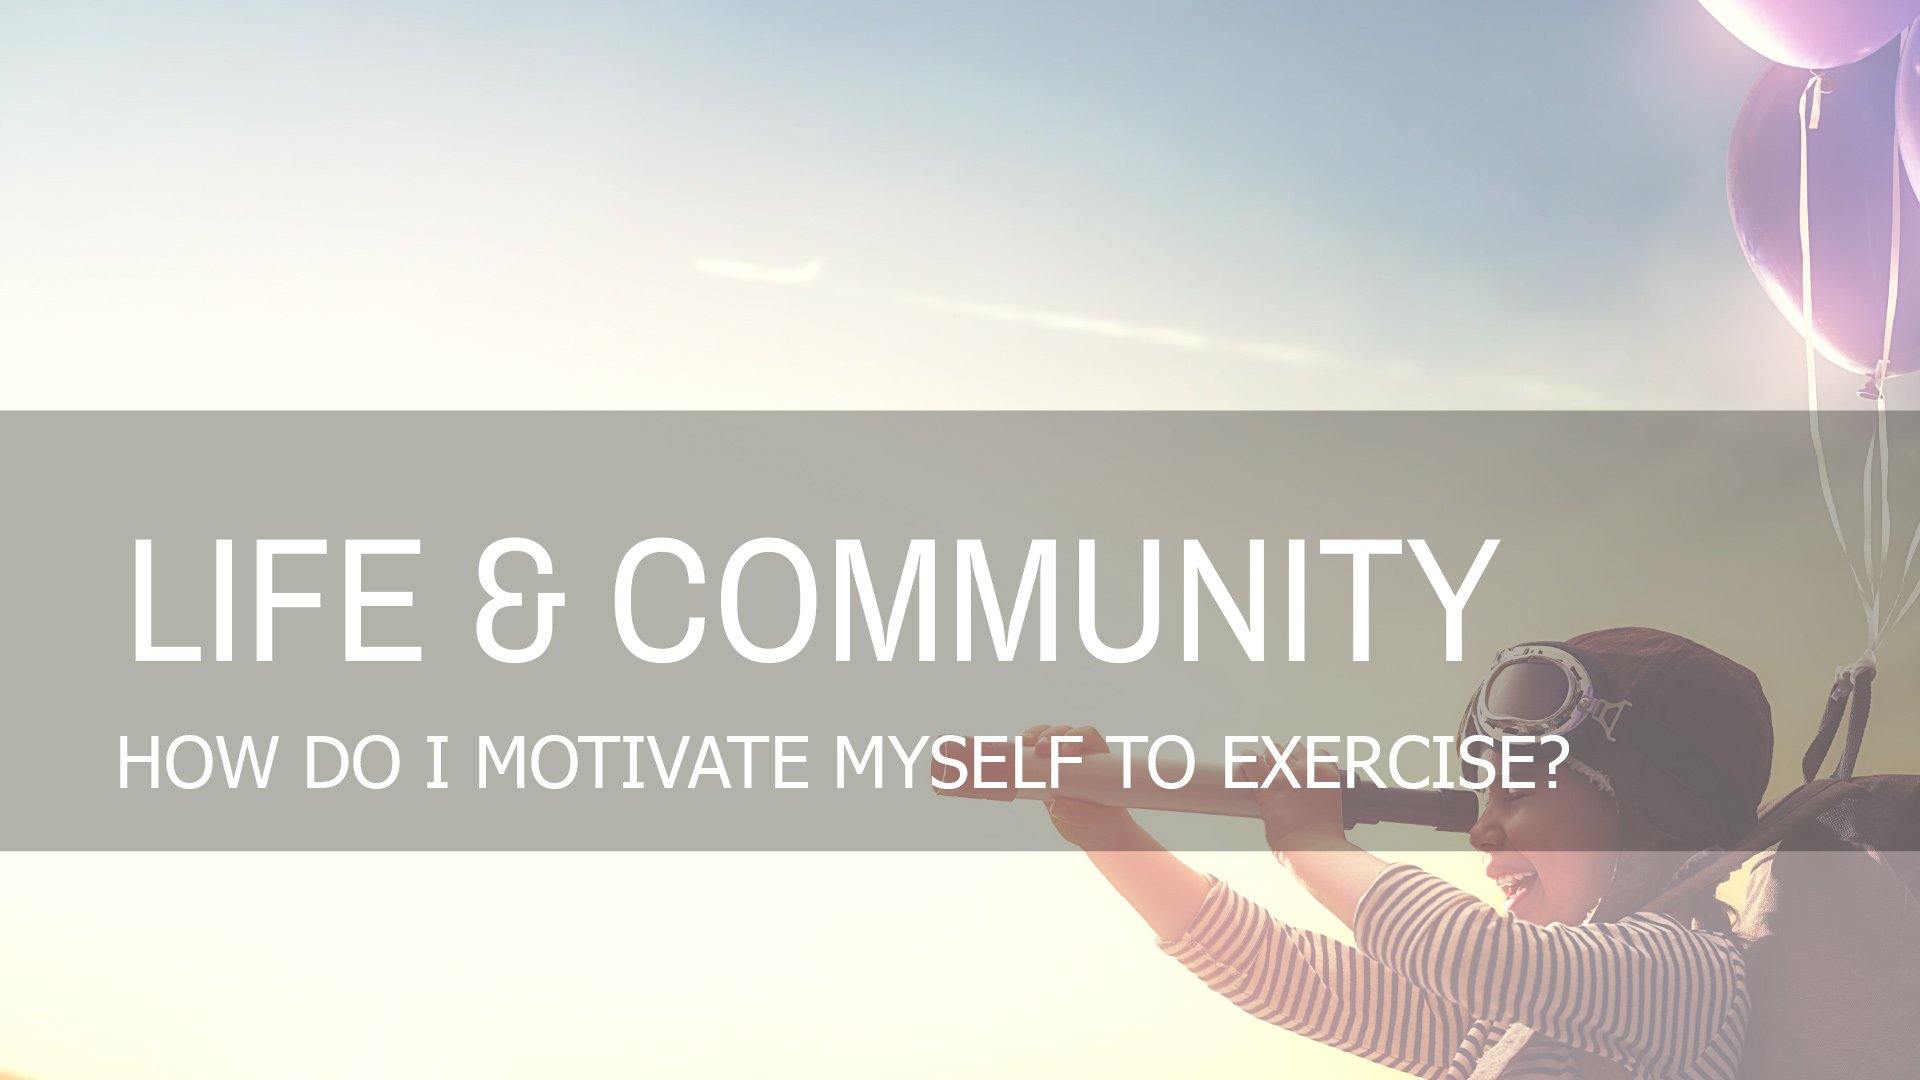 How Do I Motivate Myself to Exercise?